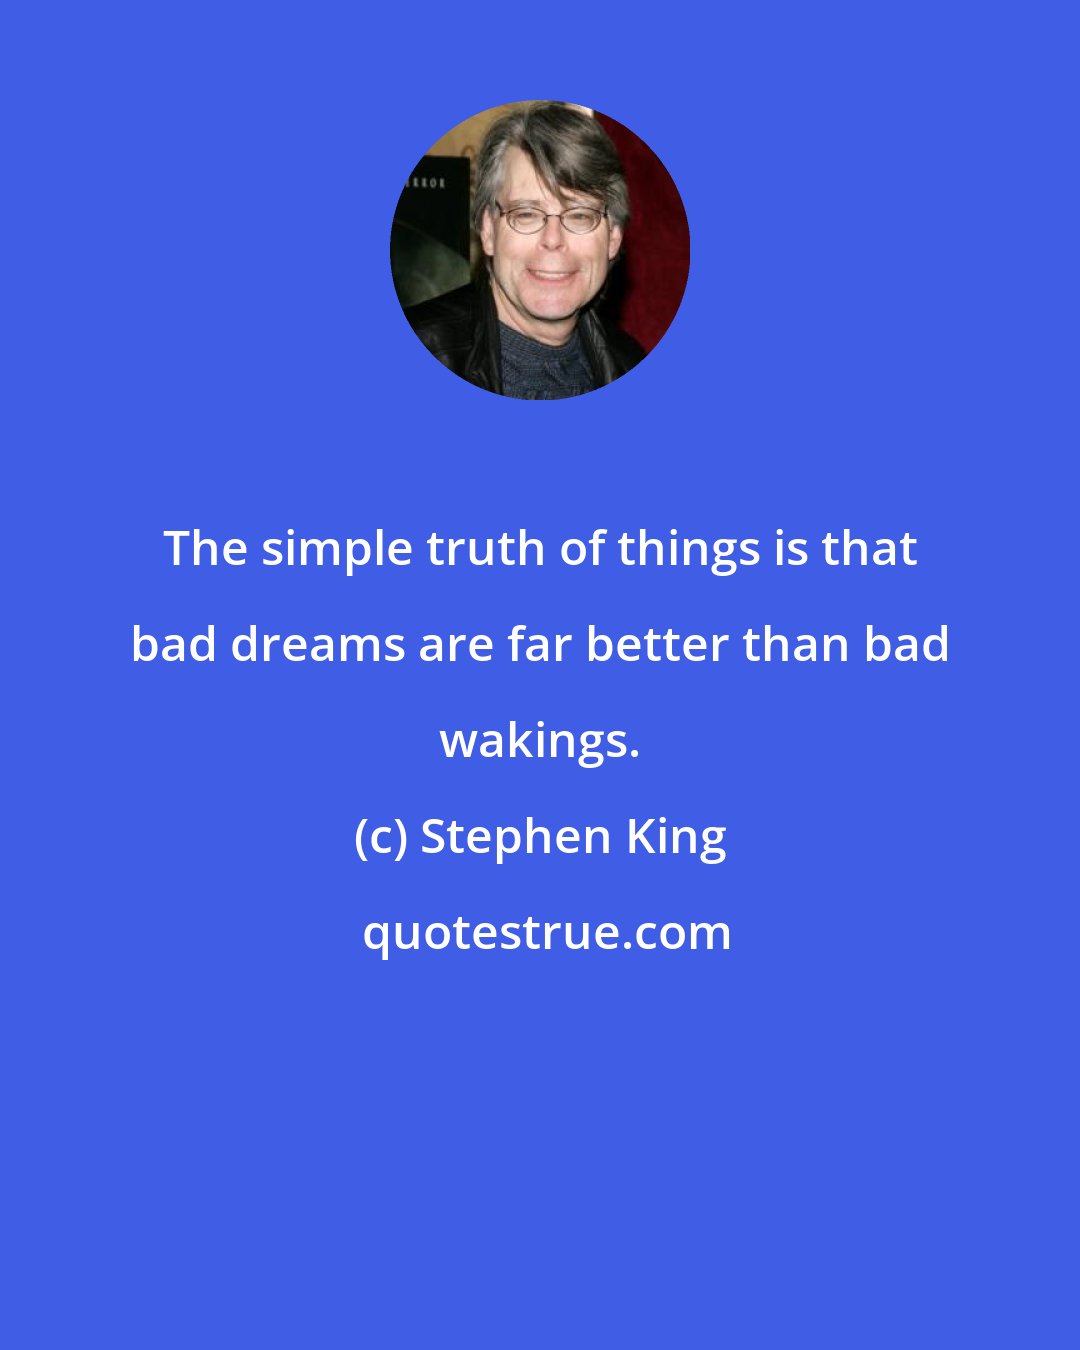 Stephen King: The simple truth of things is that bad dreams are far better than bad wakings.